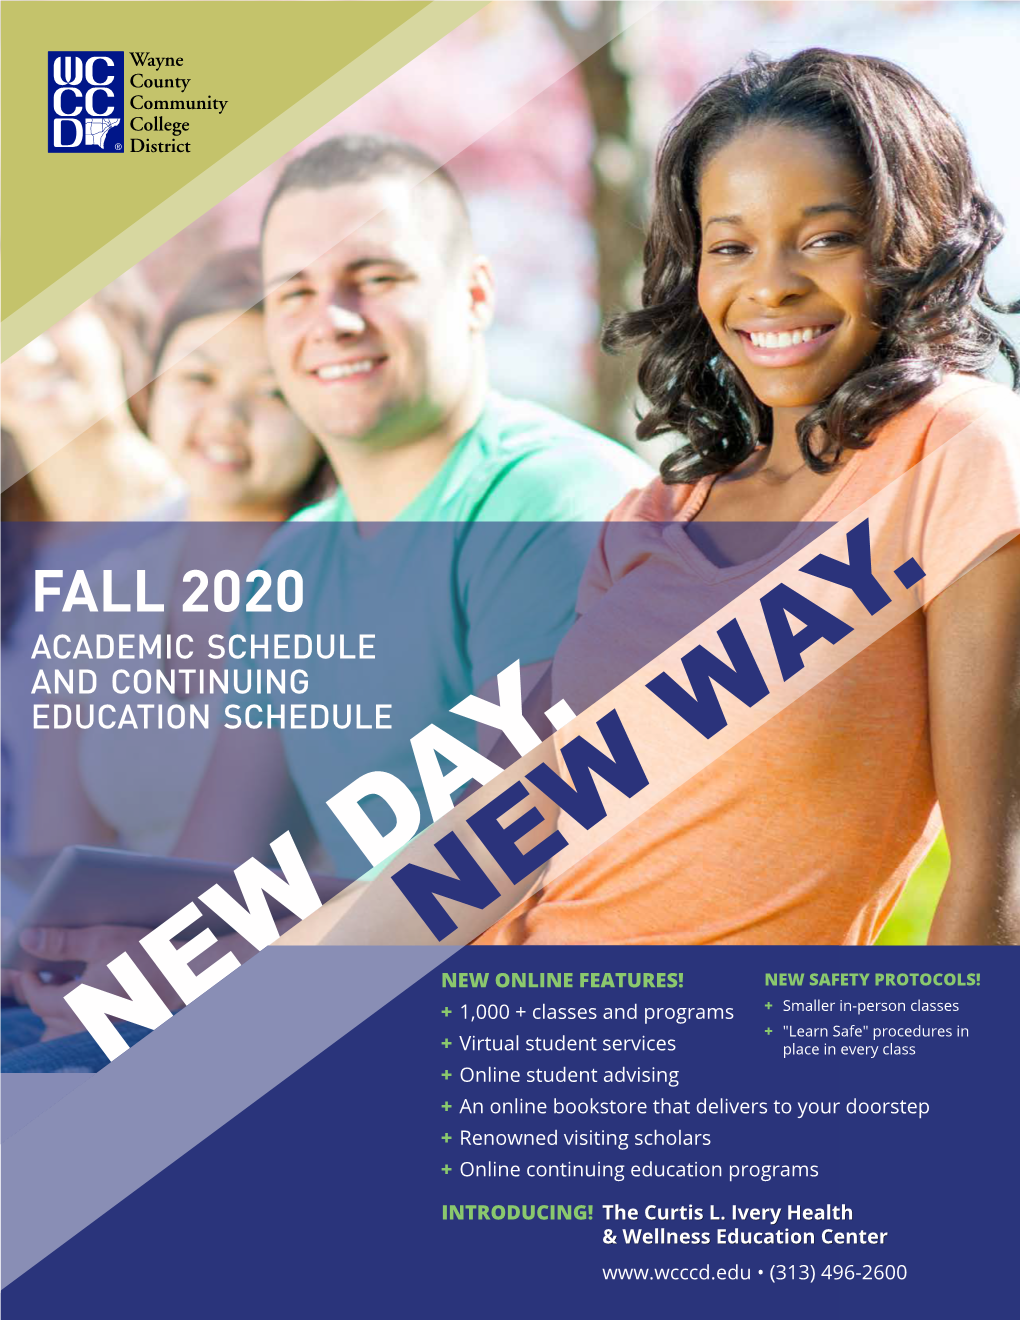 FALL 2020 Academic Schedule And Continuing Education Schedule